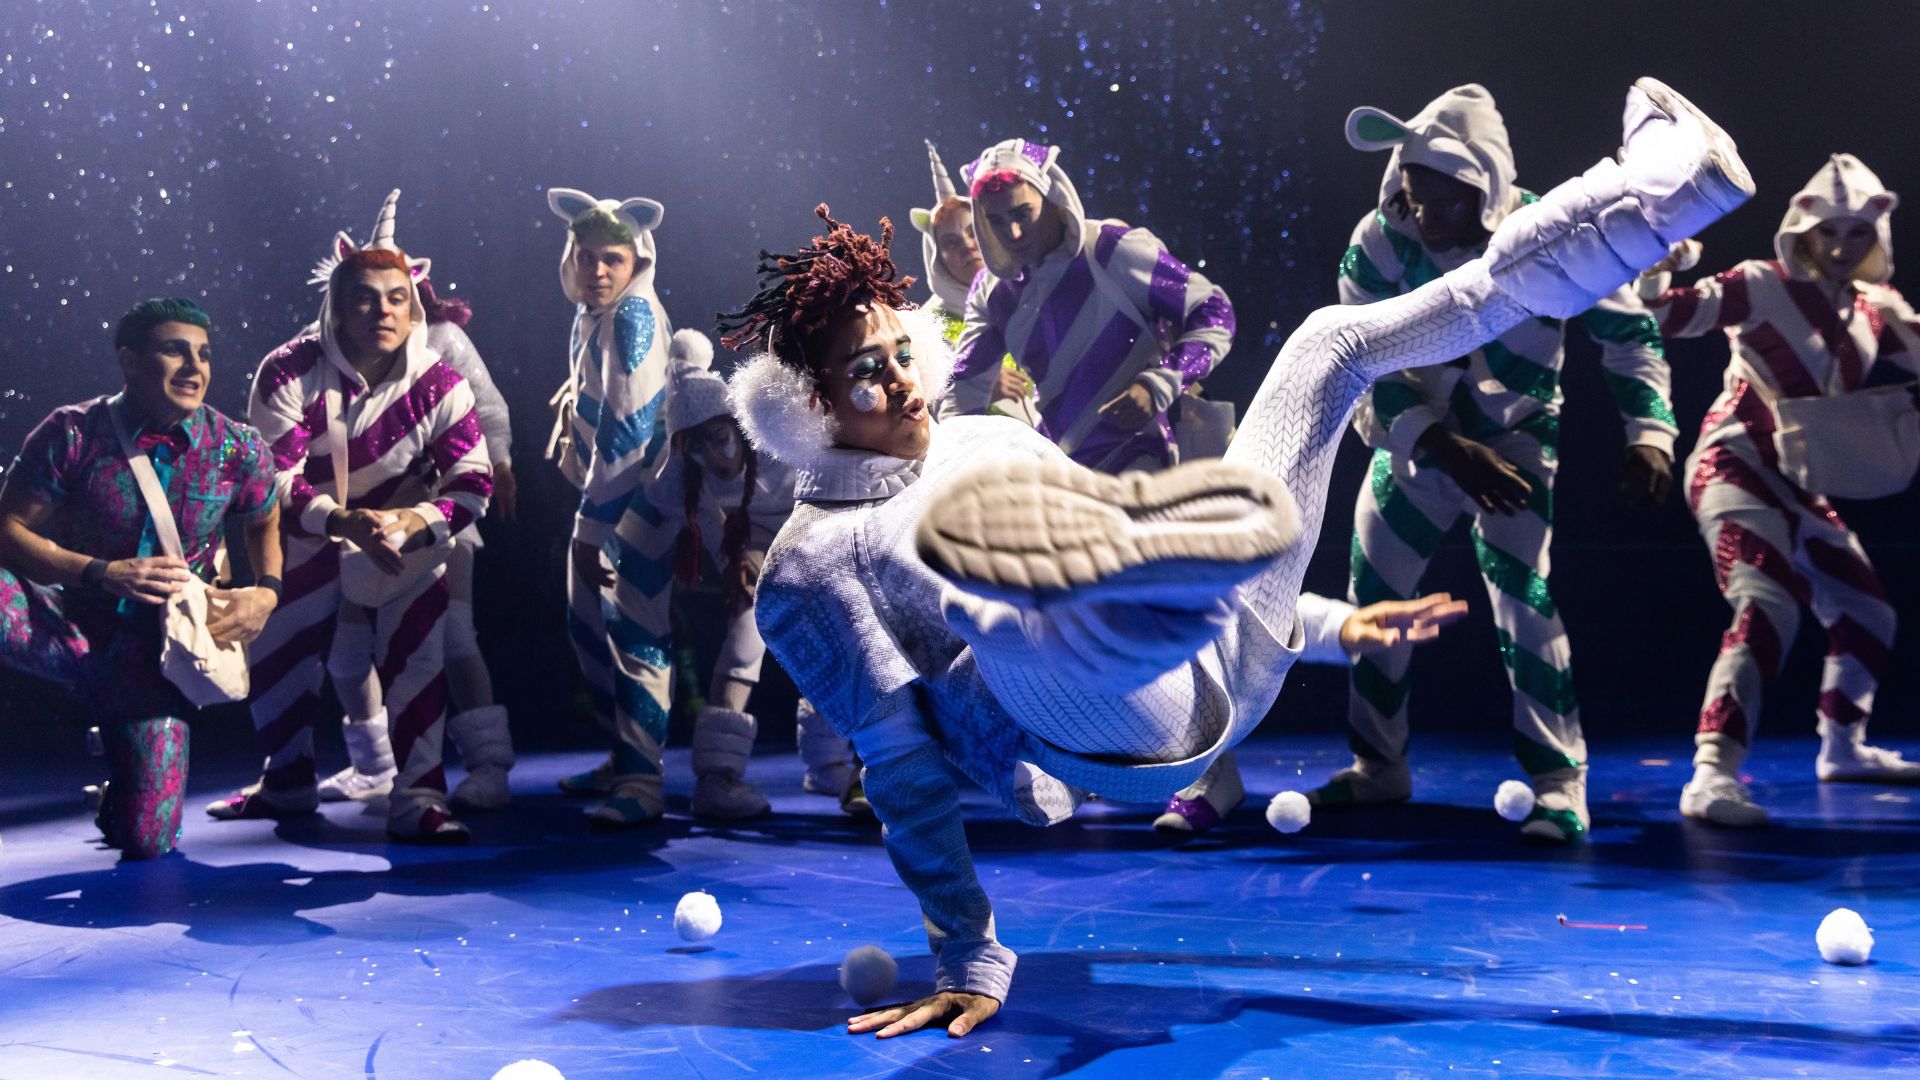 A performer break dances during a performance of ‘Twas the Night Before… by Cirque du Soleil.